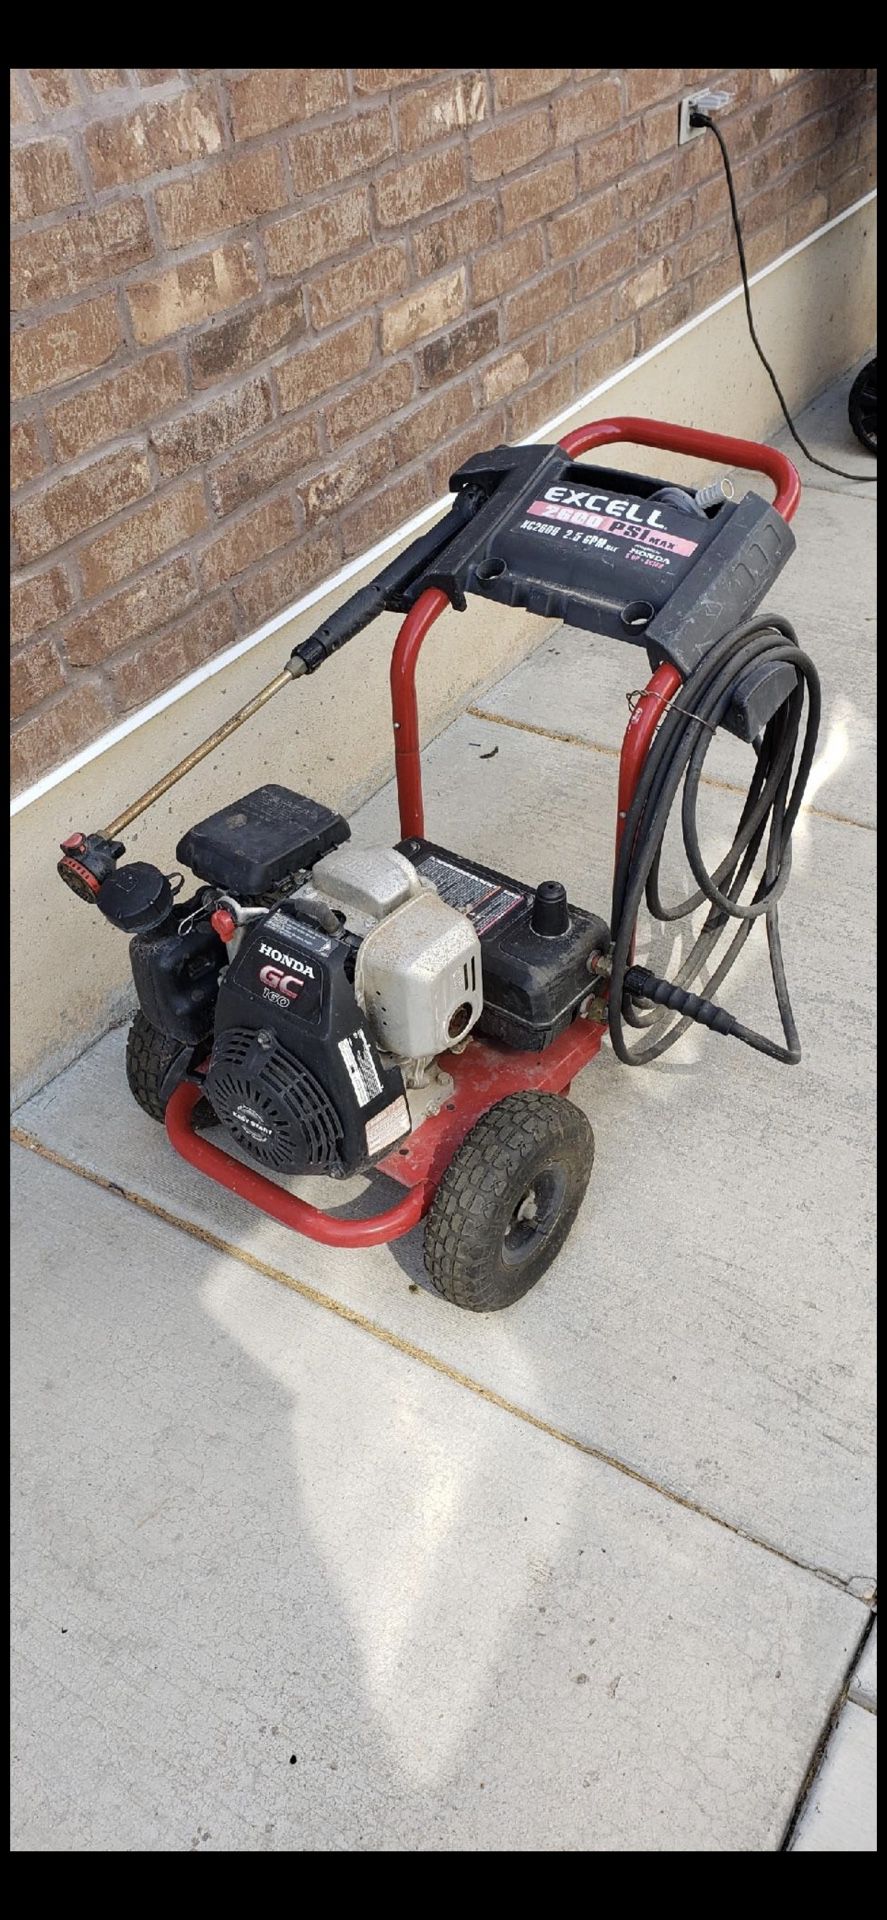 Honda pressure washer excell 2600 psi max